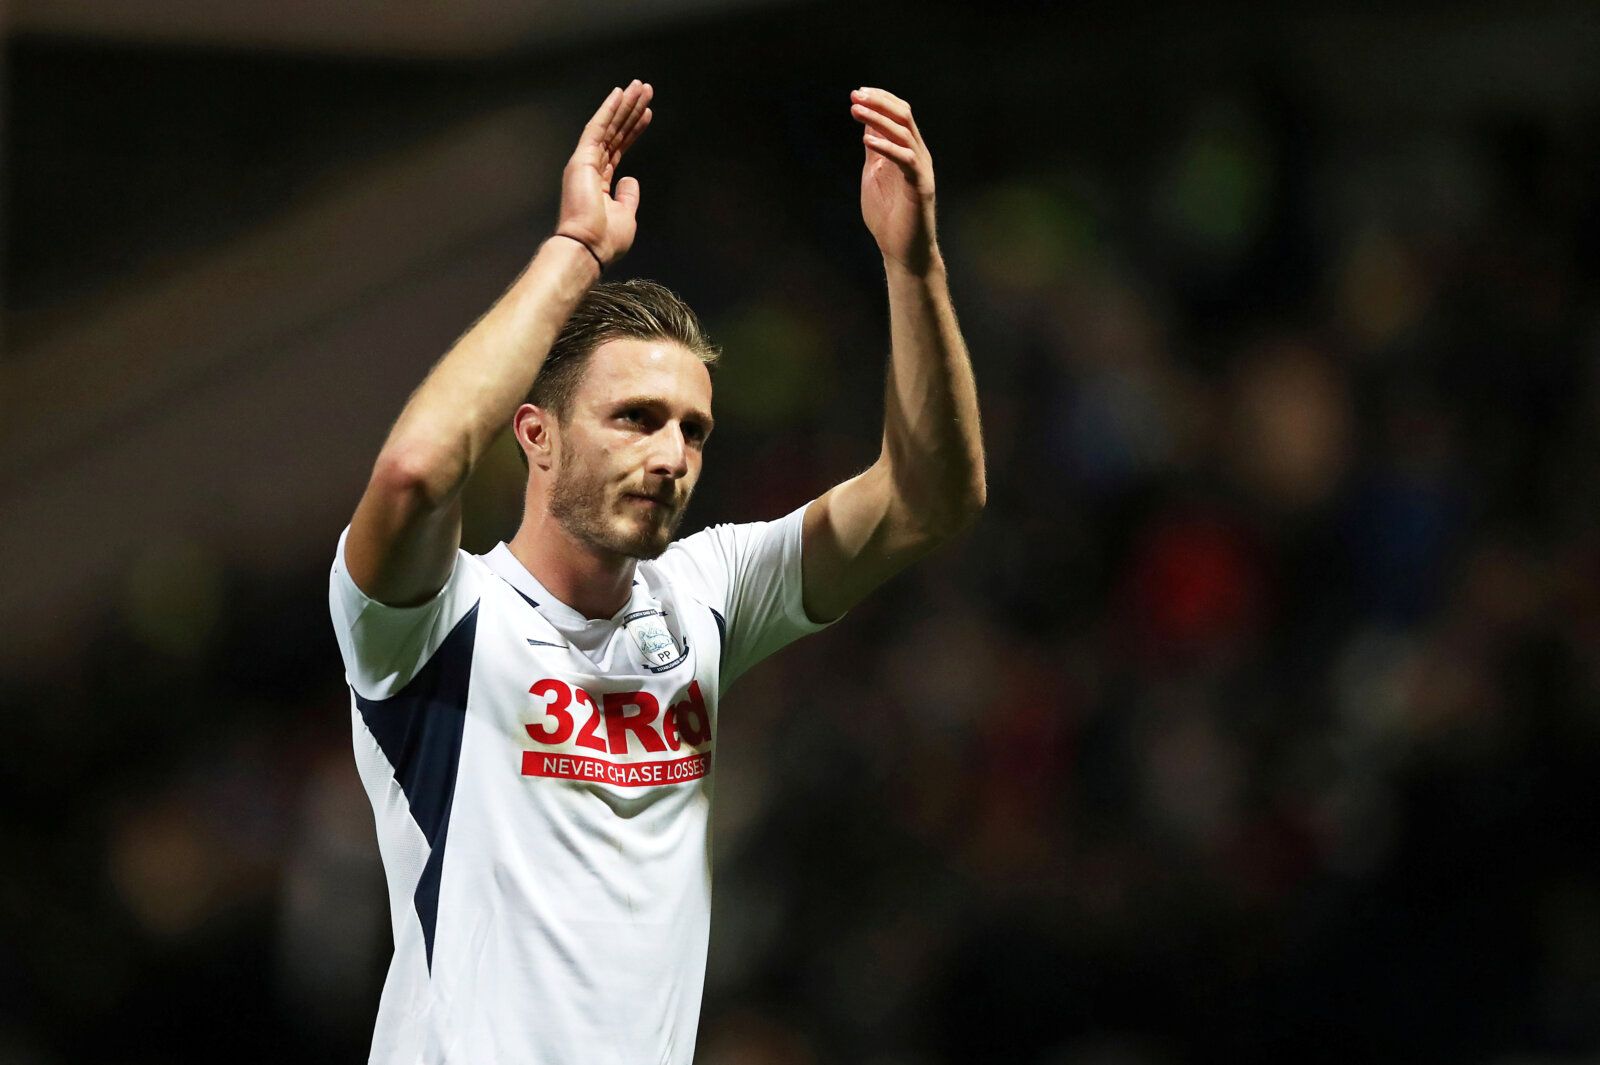 FILE PHOTO: Soccer Football - Championship - Preston North End v Leeds United - Deepdale, Preston, Britain - October 22, 2019   Preston North End's Ben Davies applauds fans after the match   Action Images via Reuters/John Clifton    EDITORIAL USE ONLY. No use with unauthorized audio, video, data, fixture lists, club/league logos or "live" services. Online in-match use limited to 75 images, no video emulation. No use in betting, games or single club/league/player publications.  Please contact you